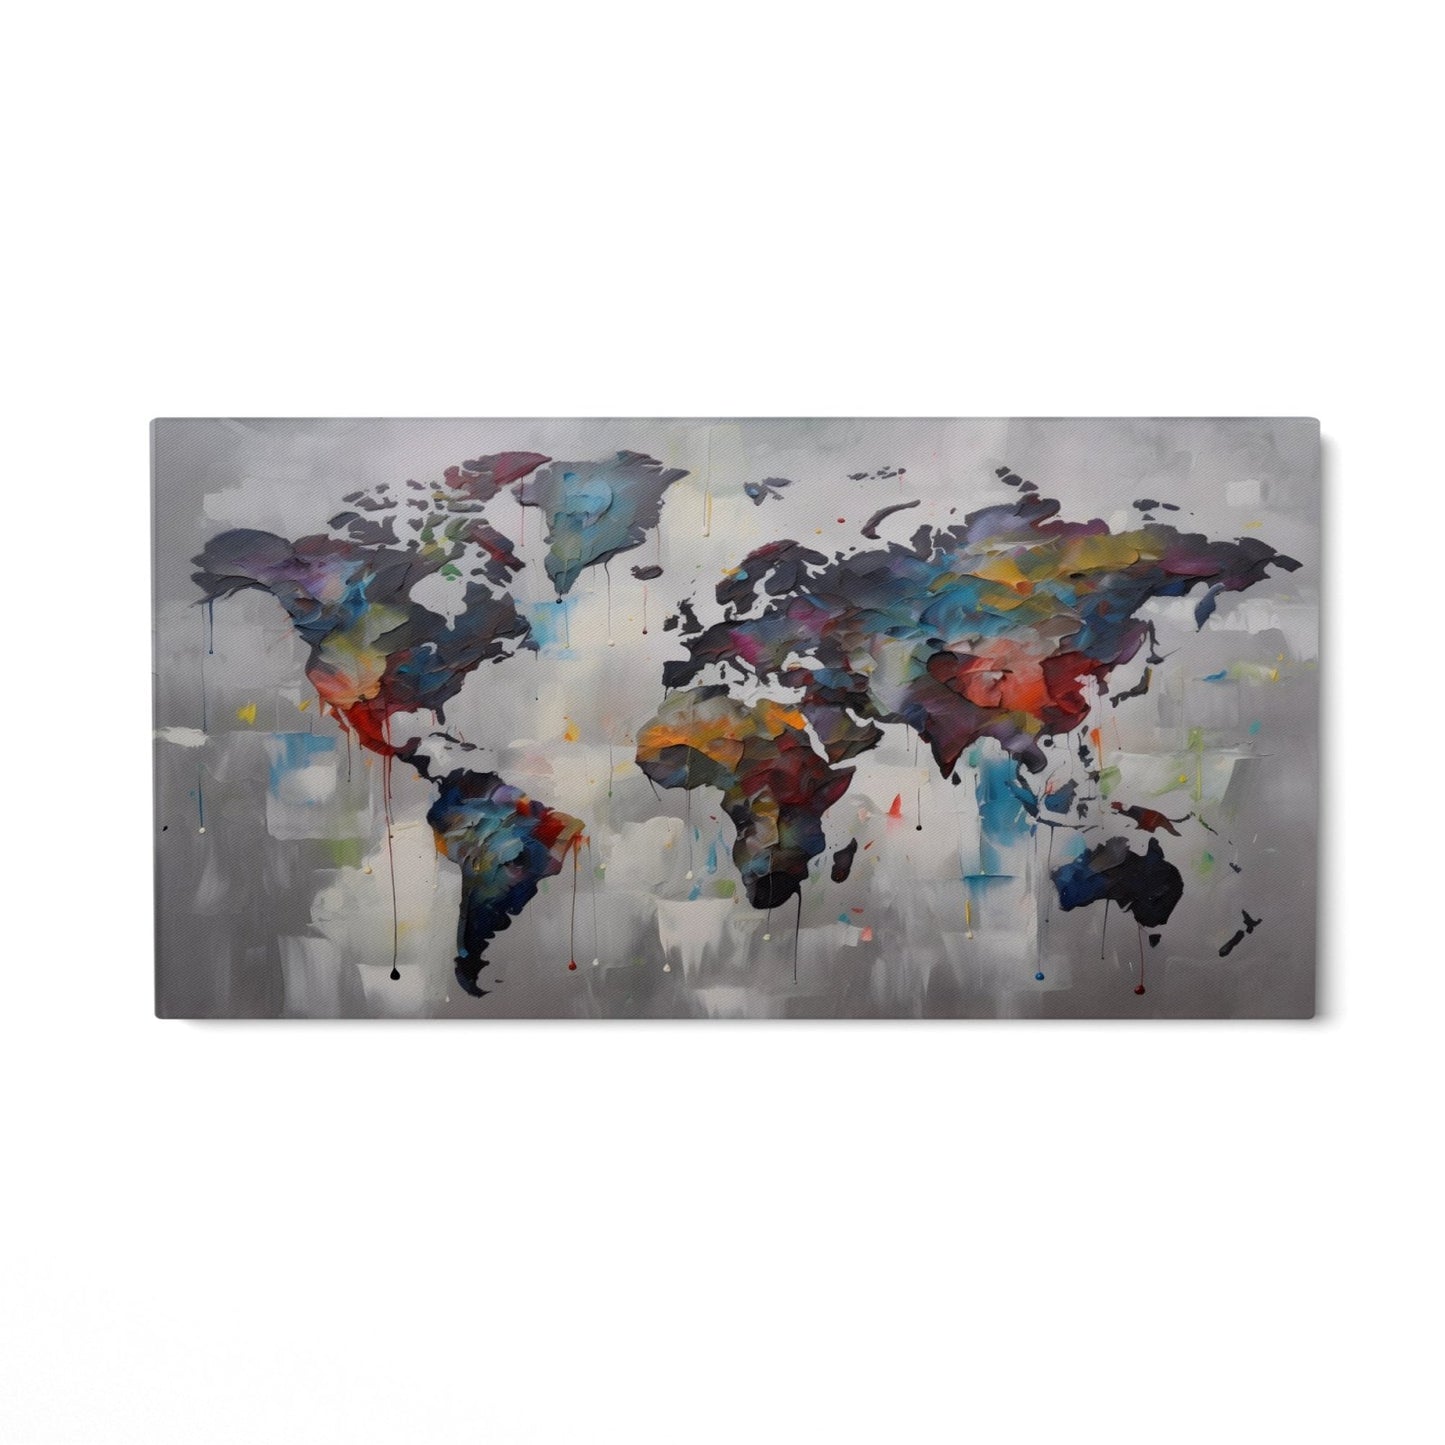 Abstract world map